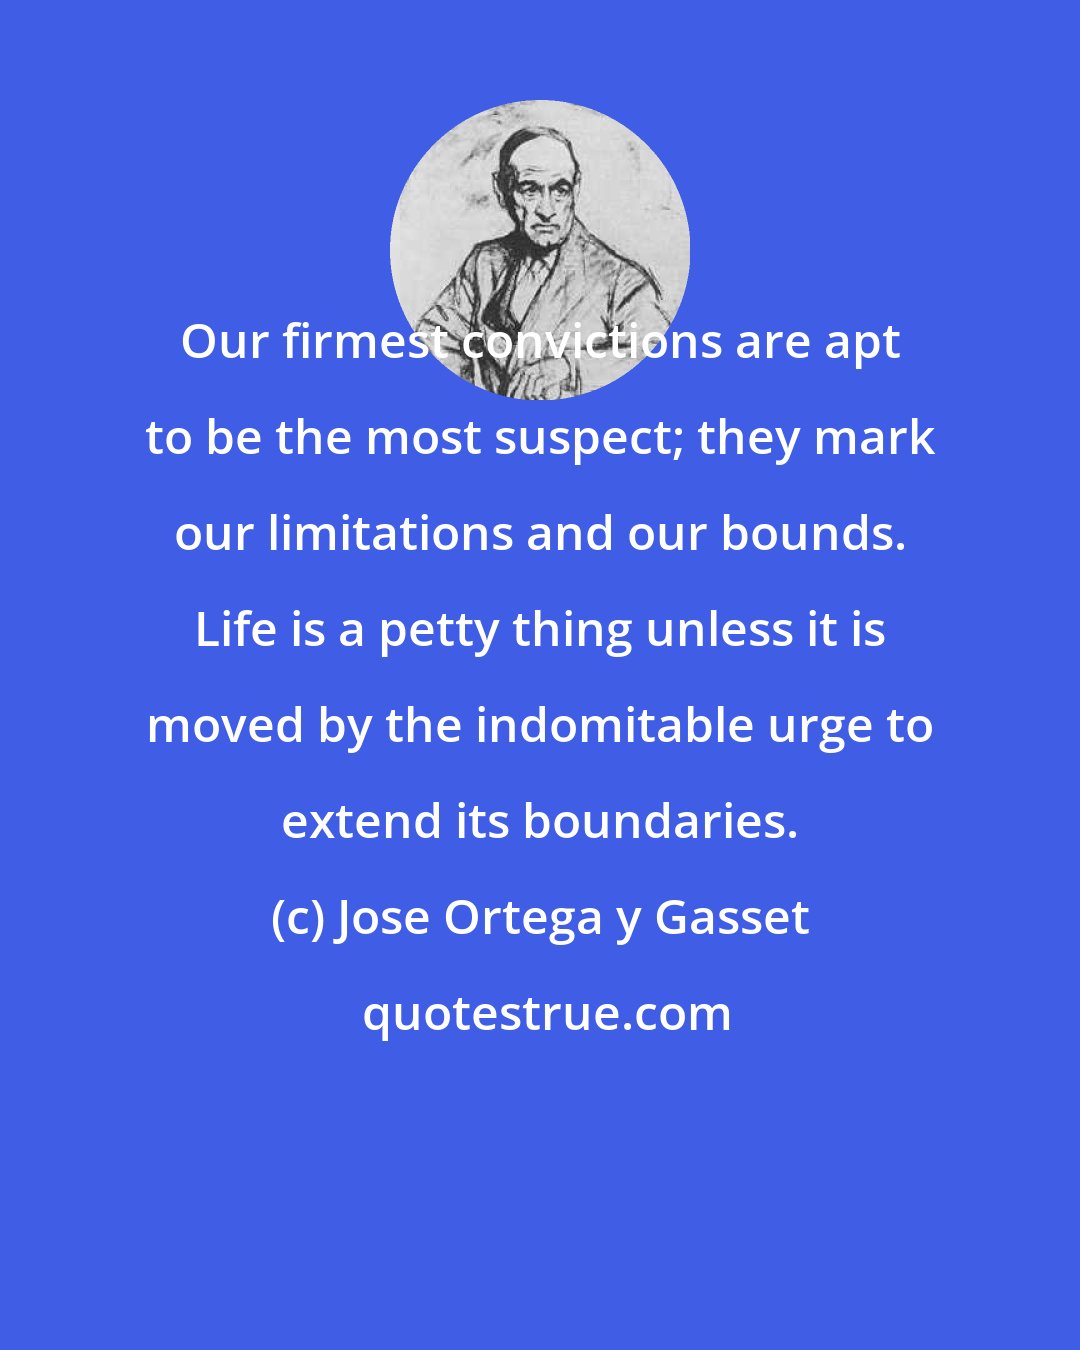 Jose Ortega y Gasset: Our firmest convictions are apt to be the most suspect; they mark our limitations and our bounds. Life is a petty thing unless it is moved by the indomitable urge to extend its boundaries.